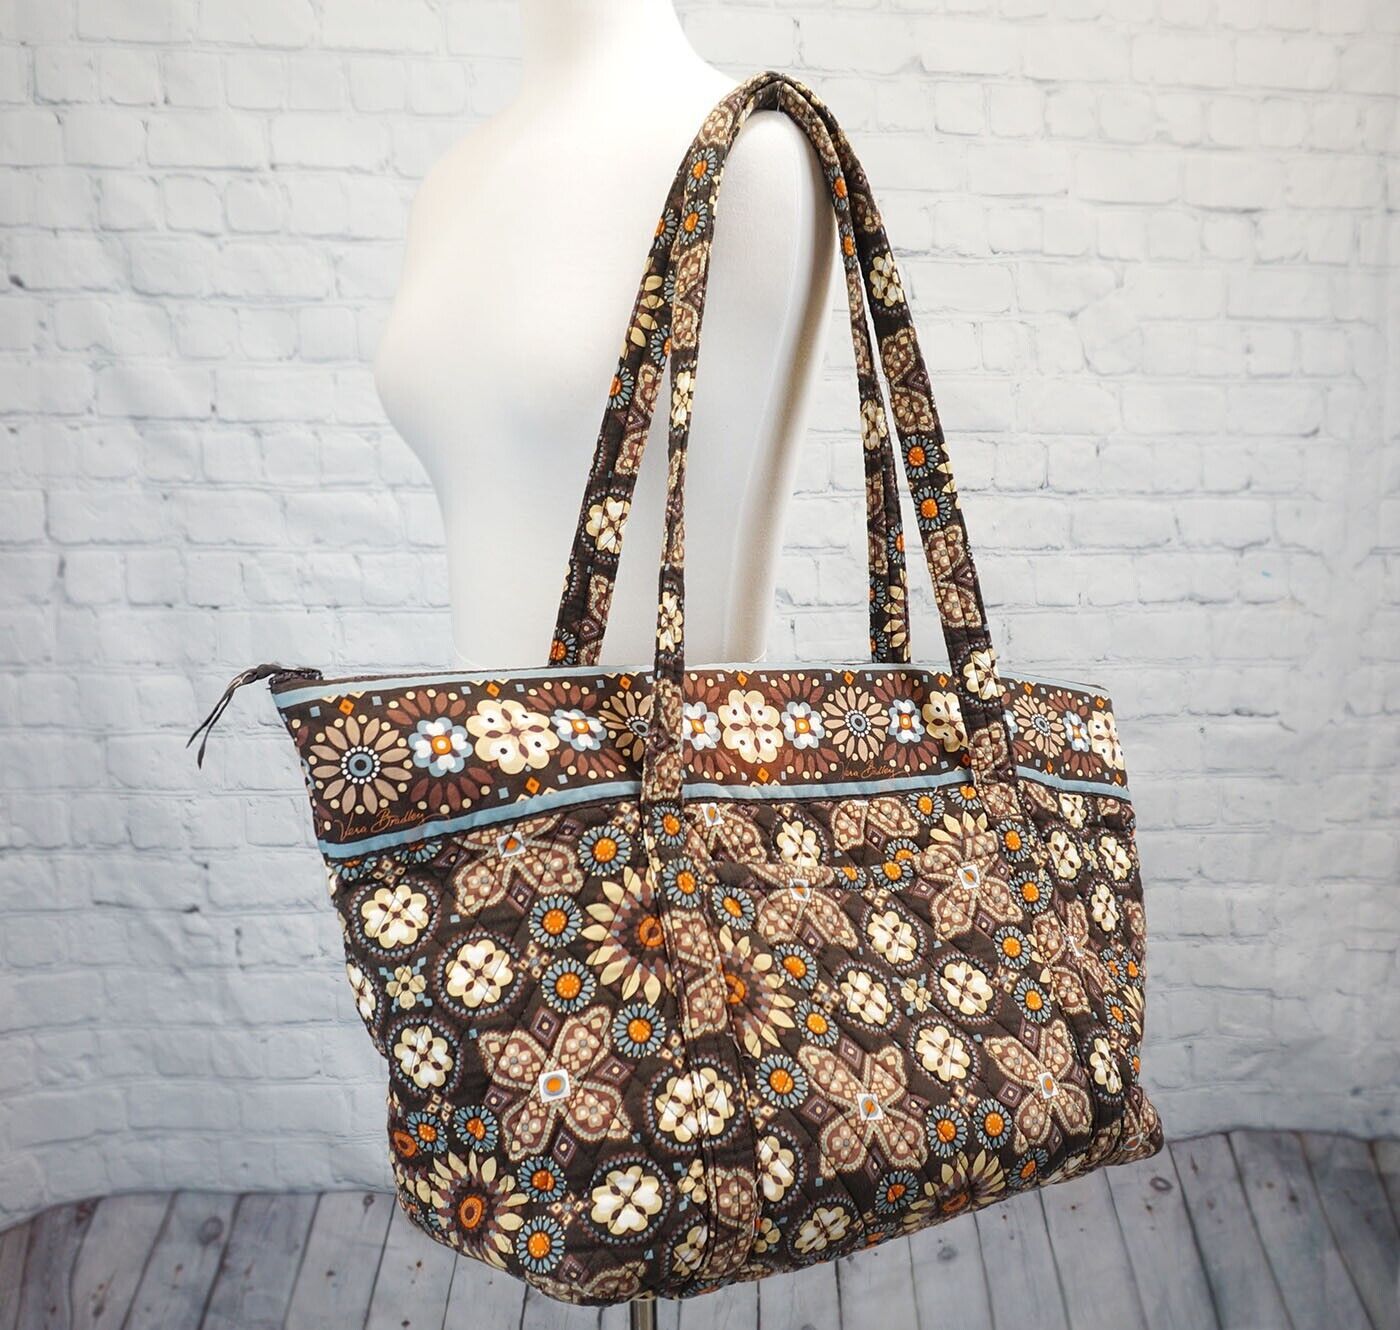 Primary image for ❤️ VERA BRADLEY Canyon Miller Travel Zip Tote Brown Medallion